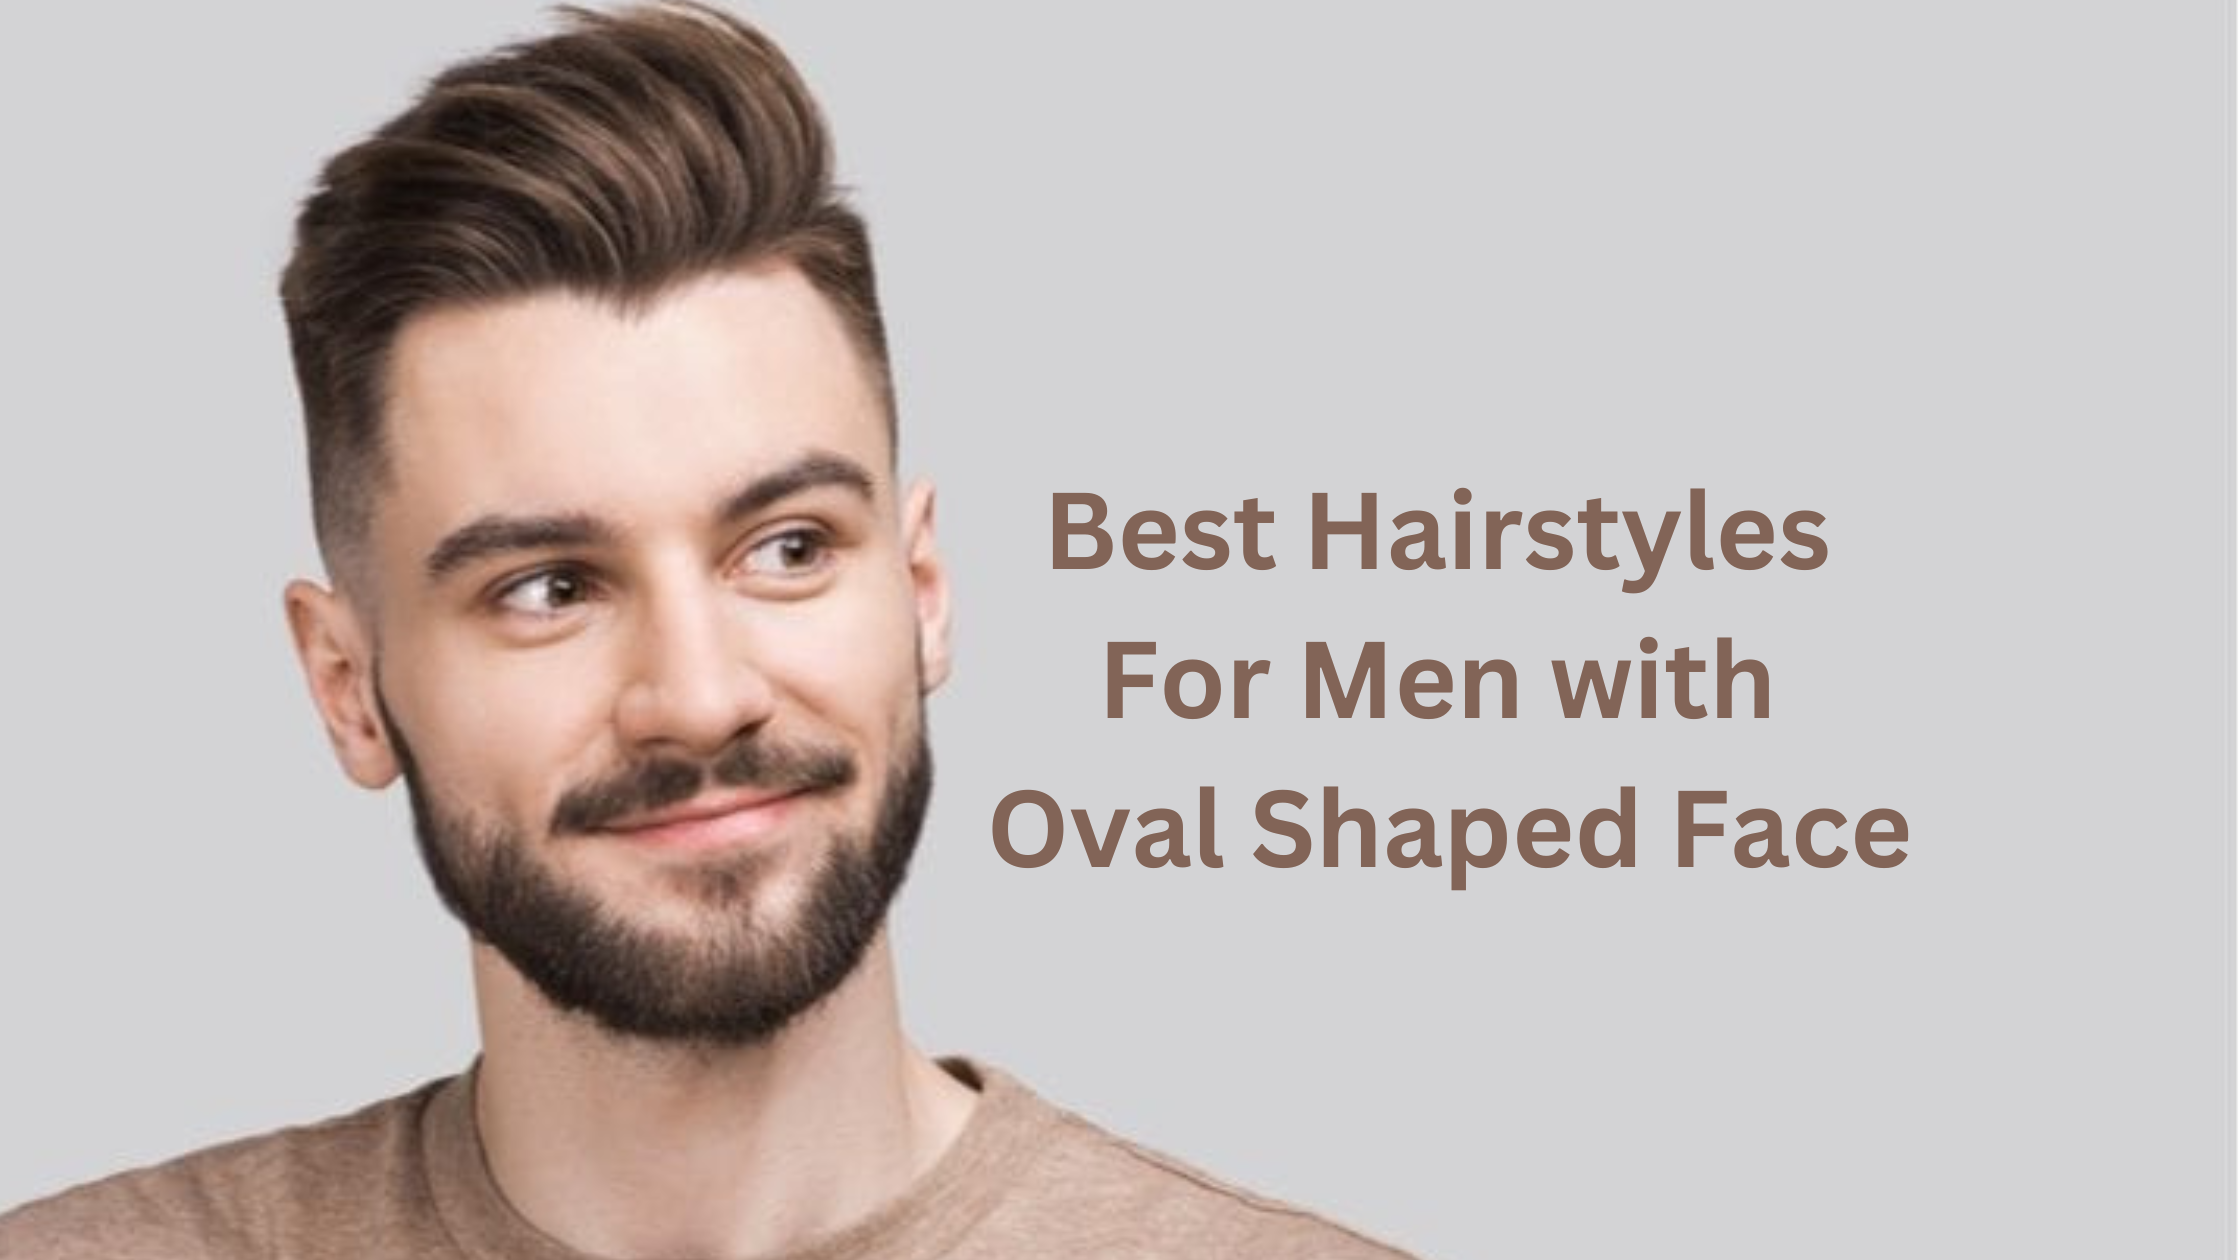 5 Well-Suited Oval Face Hairstyles Male 2022 - Hair Loss Geeks